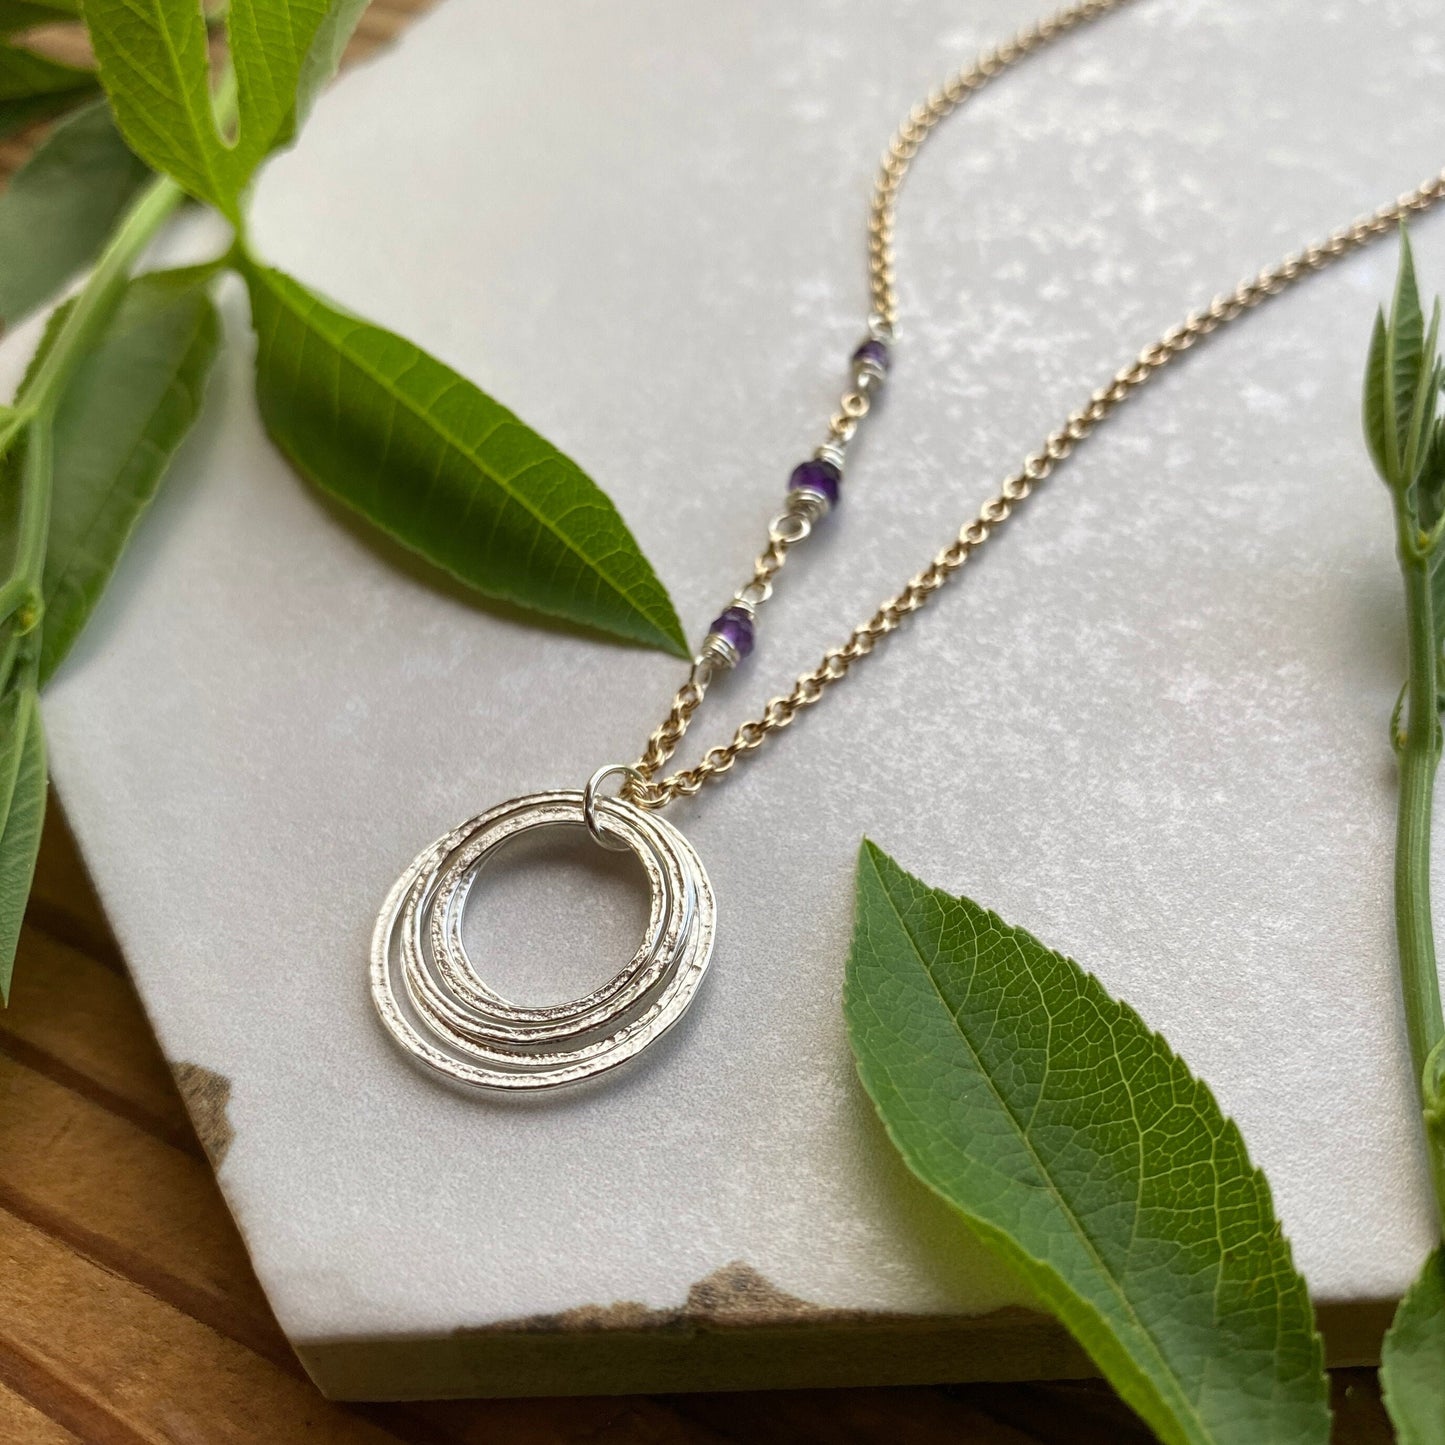 5 Circle 50th Mixed Metal Minimalist Milestone Birthday Necklace with Birthstones, 5 Rings for 5 Decades Silver 5 Circles Pendant on Gold